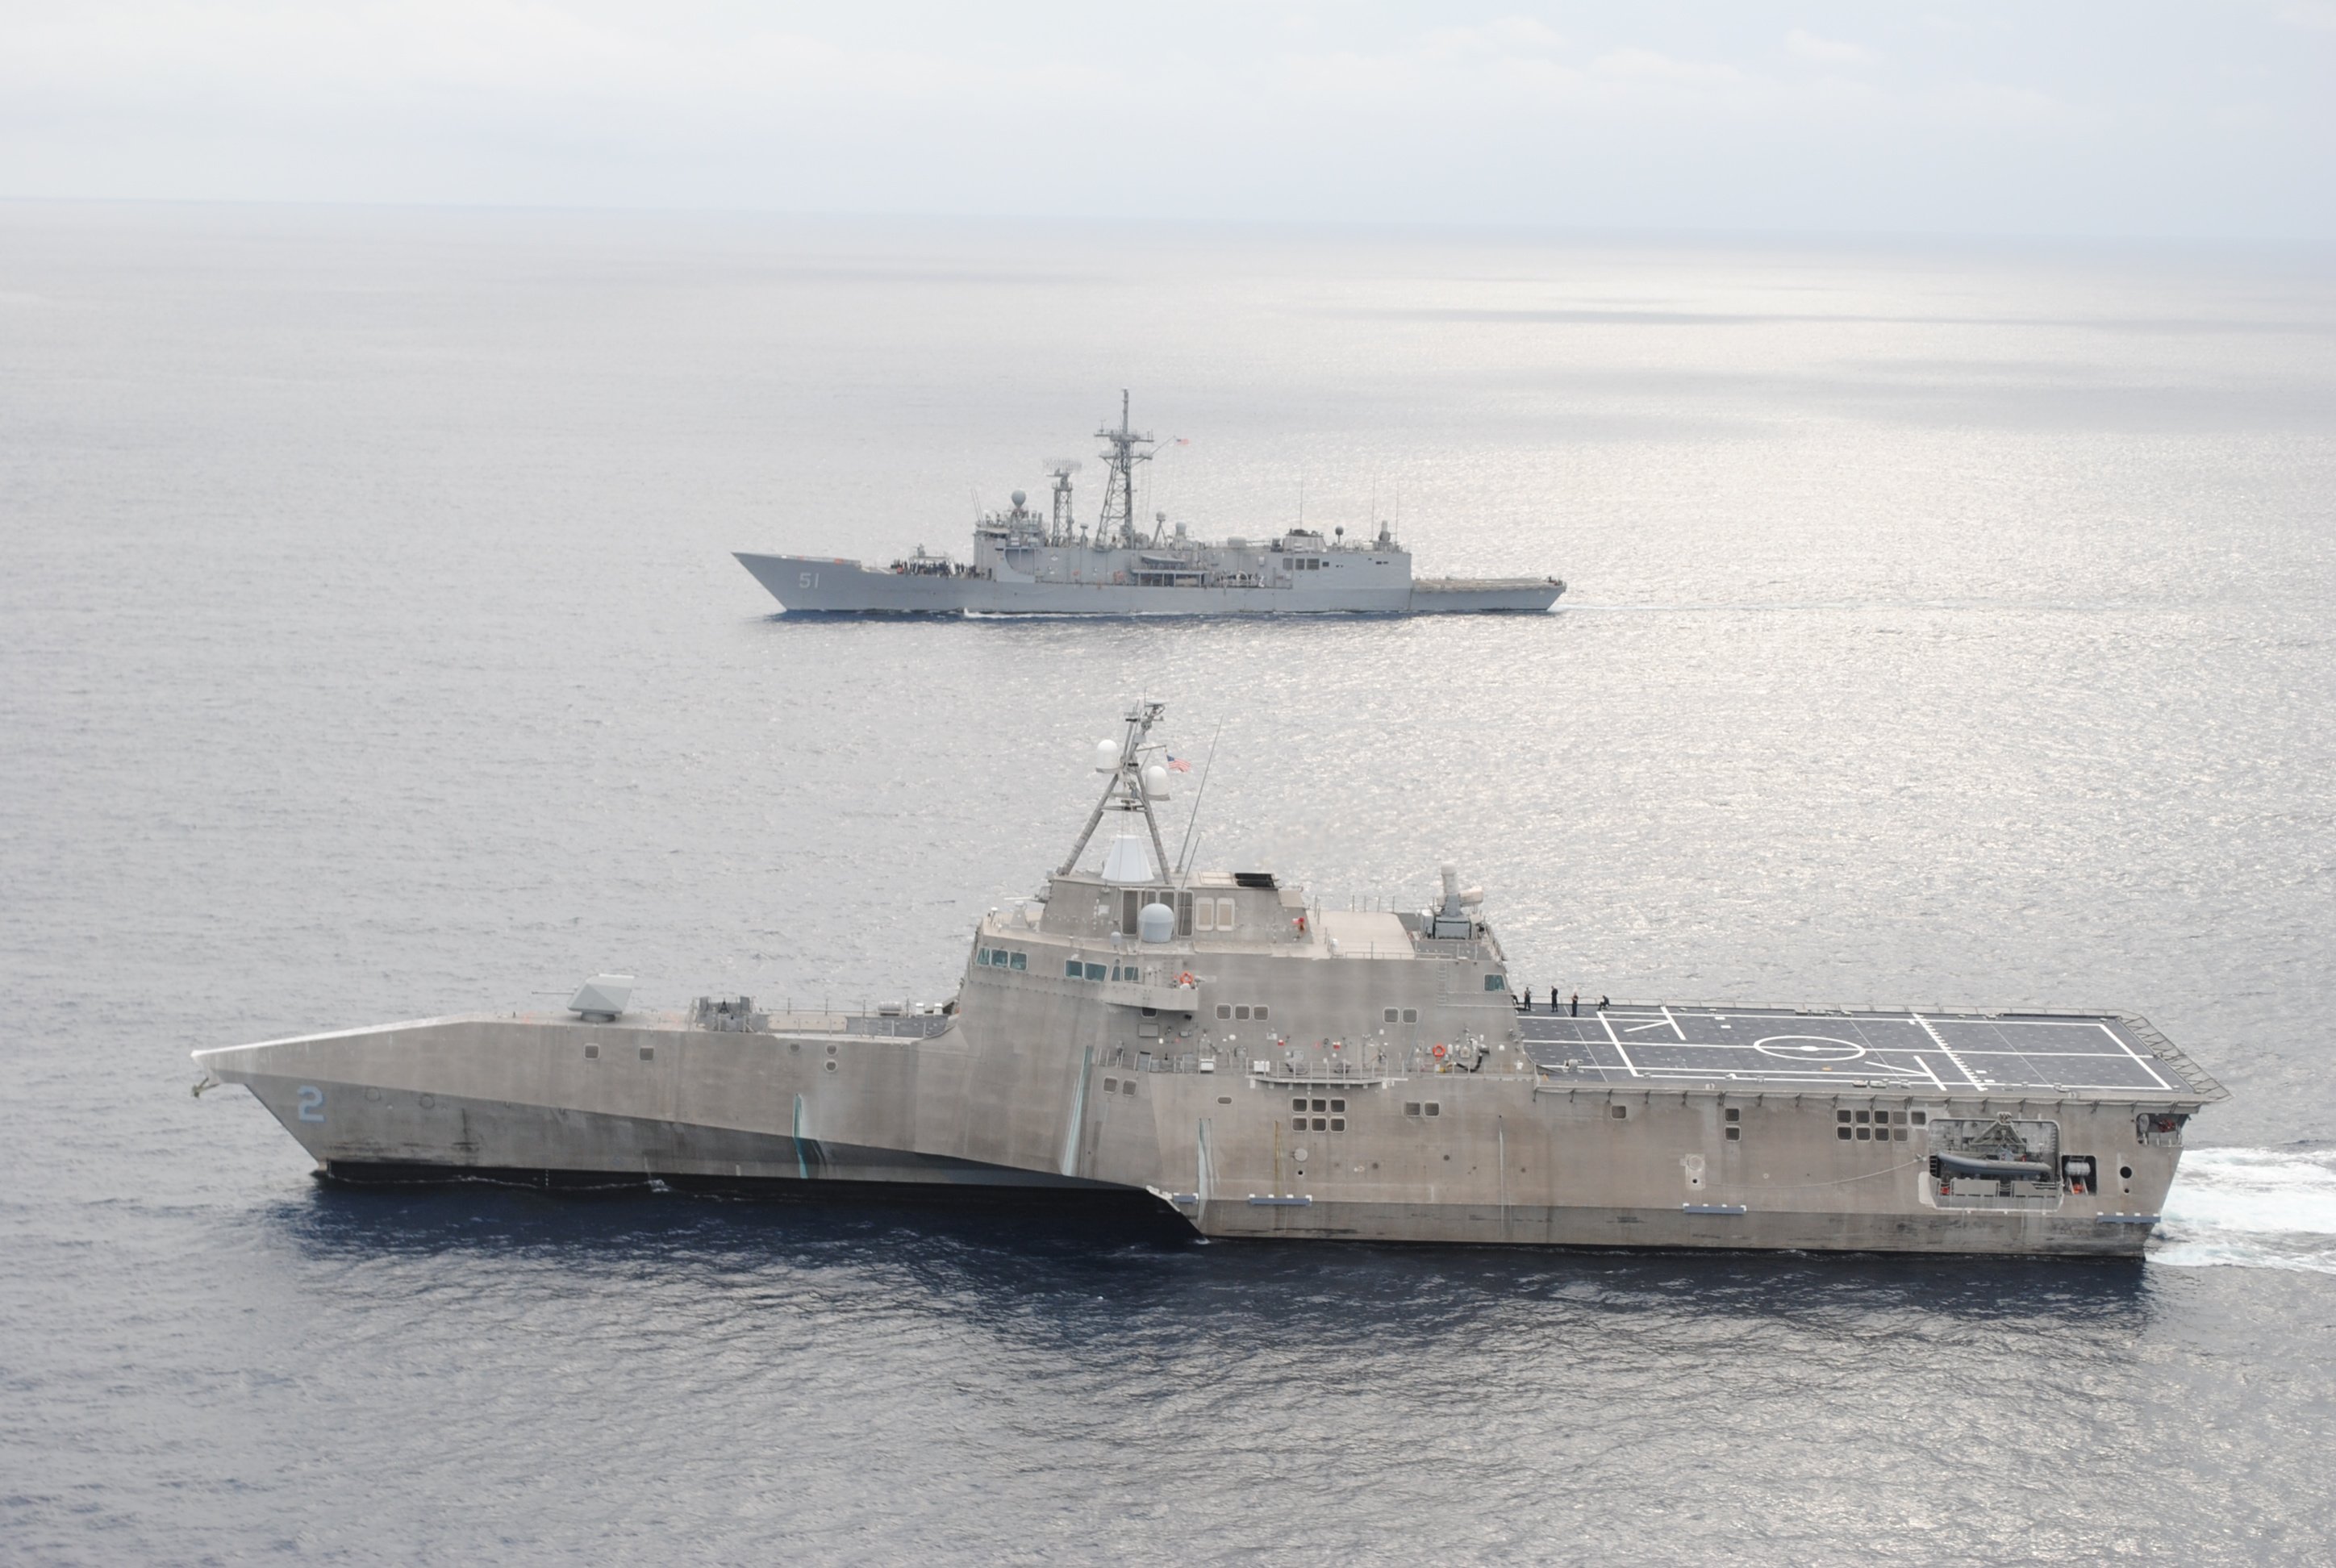 The guided-missile frigate USS Gary (FFG-51), top, and the littoral combat ship USS Independence (LCS-2) conduct a photo exercise off the coast of Central America in January. US Navy photo.